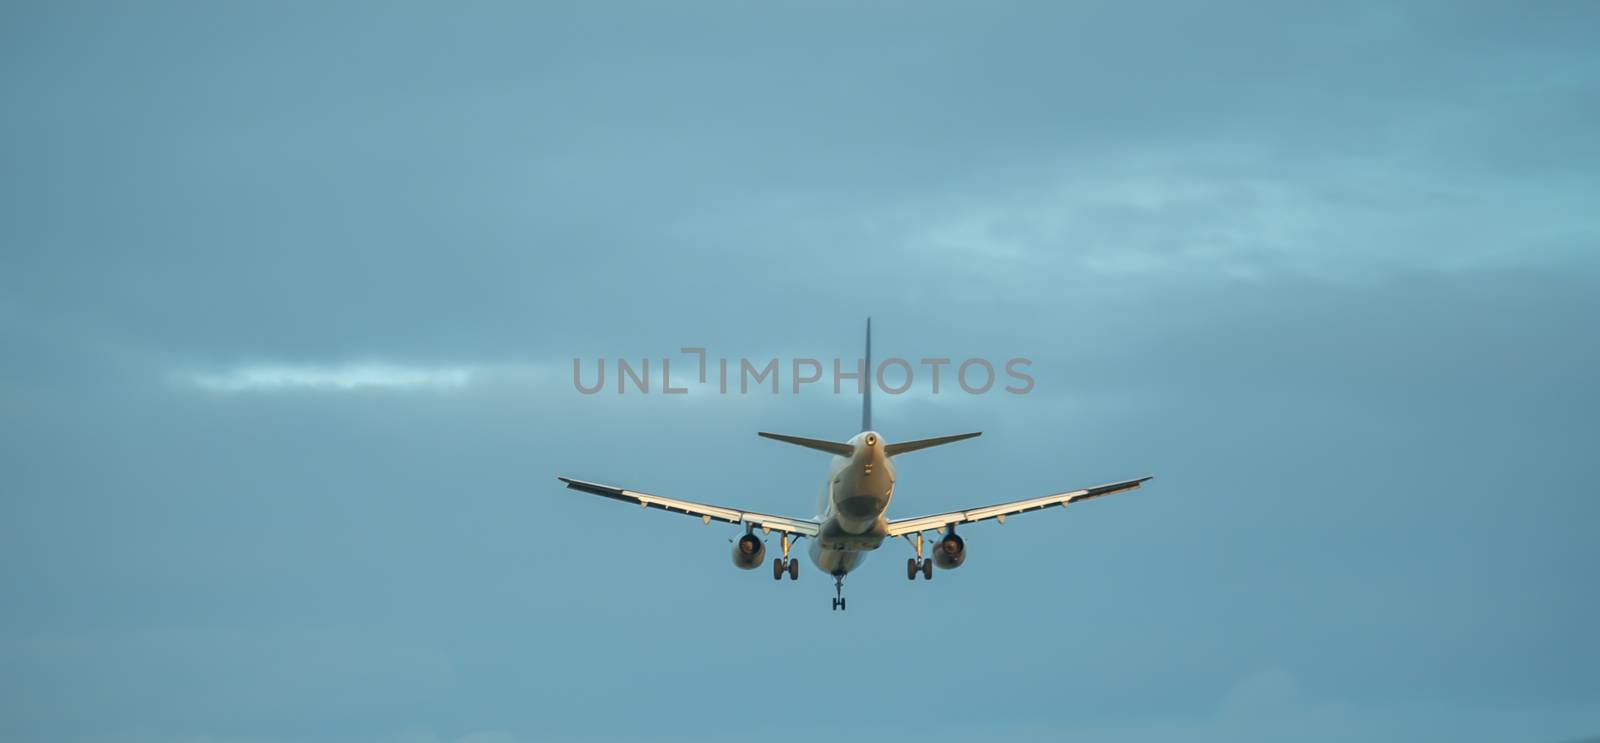 Airplane from the back up in the sky by sandra_fotodesign